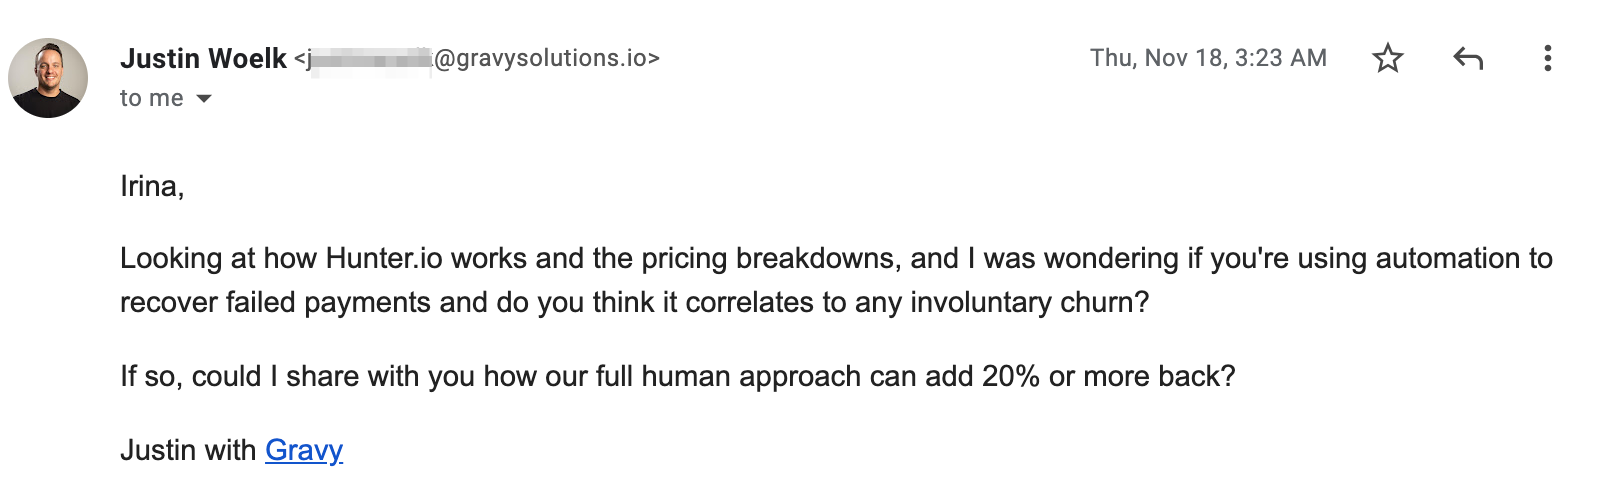 Cold email that brings value